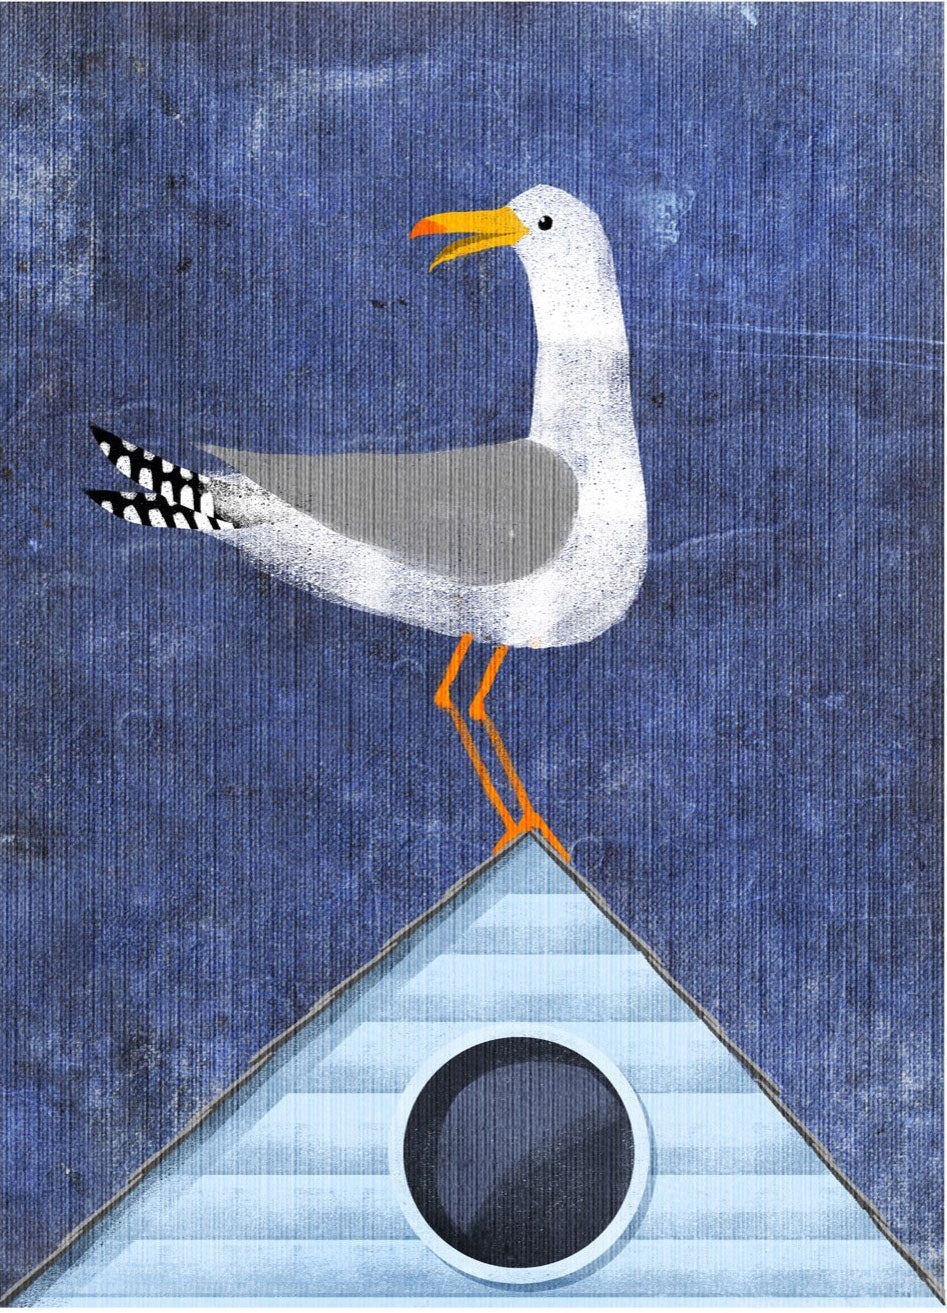 Seagull On The Roof Print By Jago